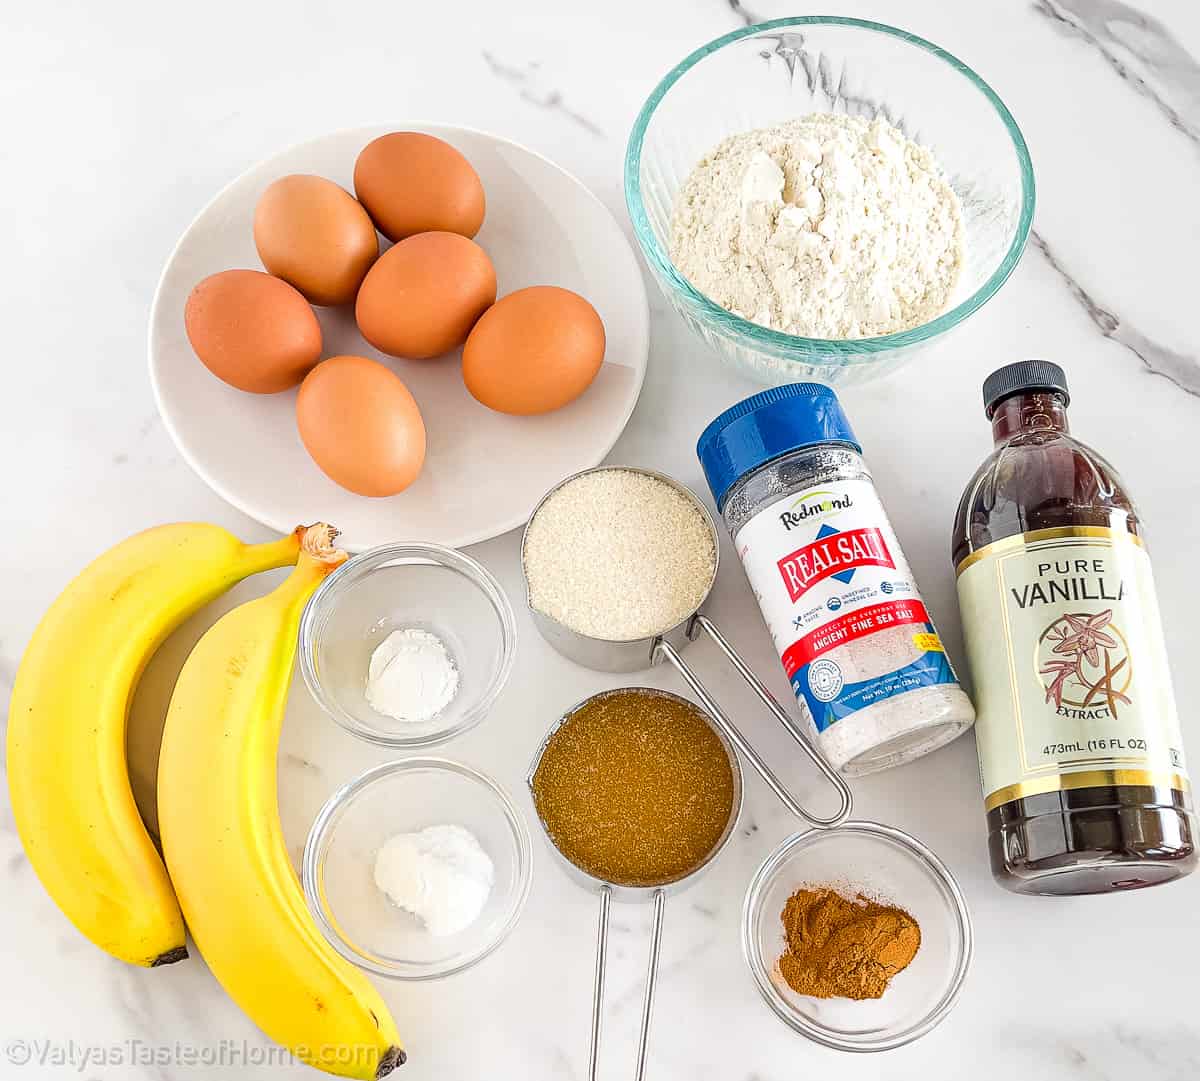 Making Banana Rolls at home requires super simple ingredients that I'm sure are in your pantry already!